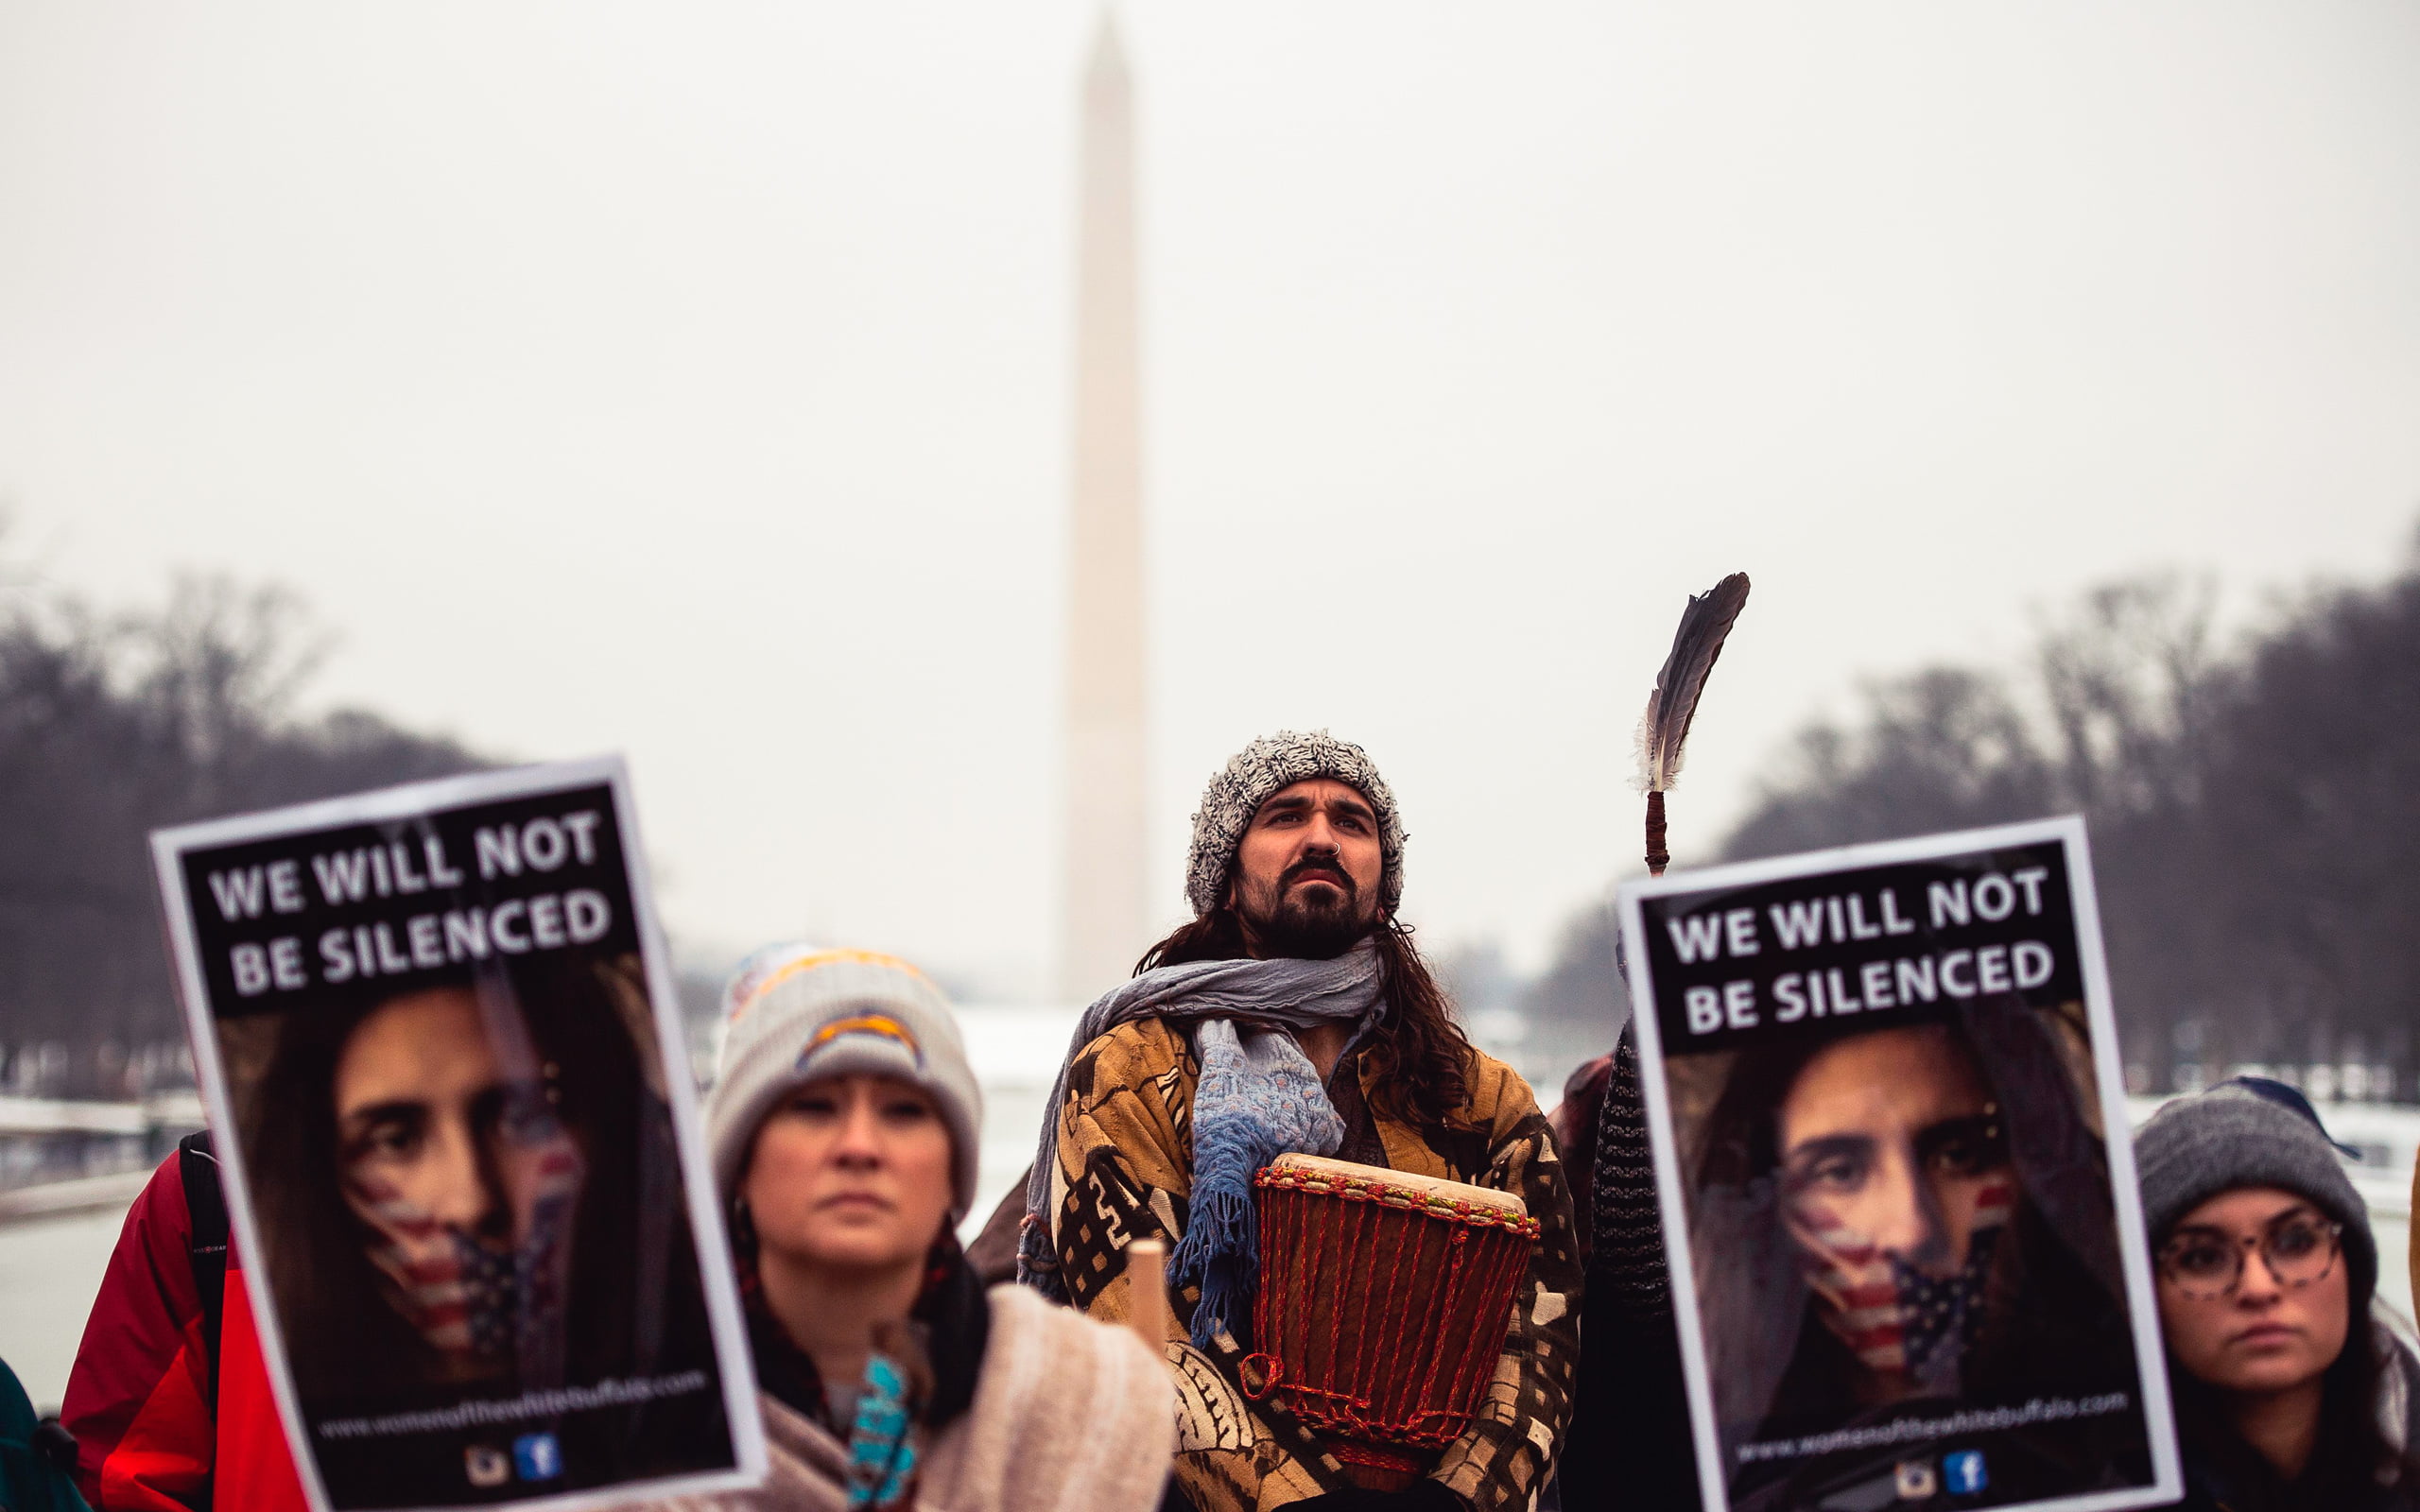 Native American men and women protesting with signs in front of the Washington Monument